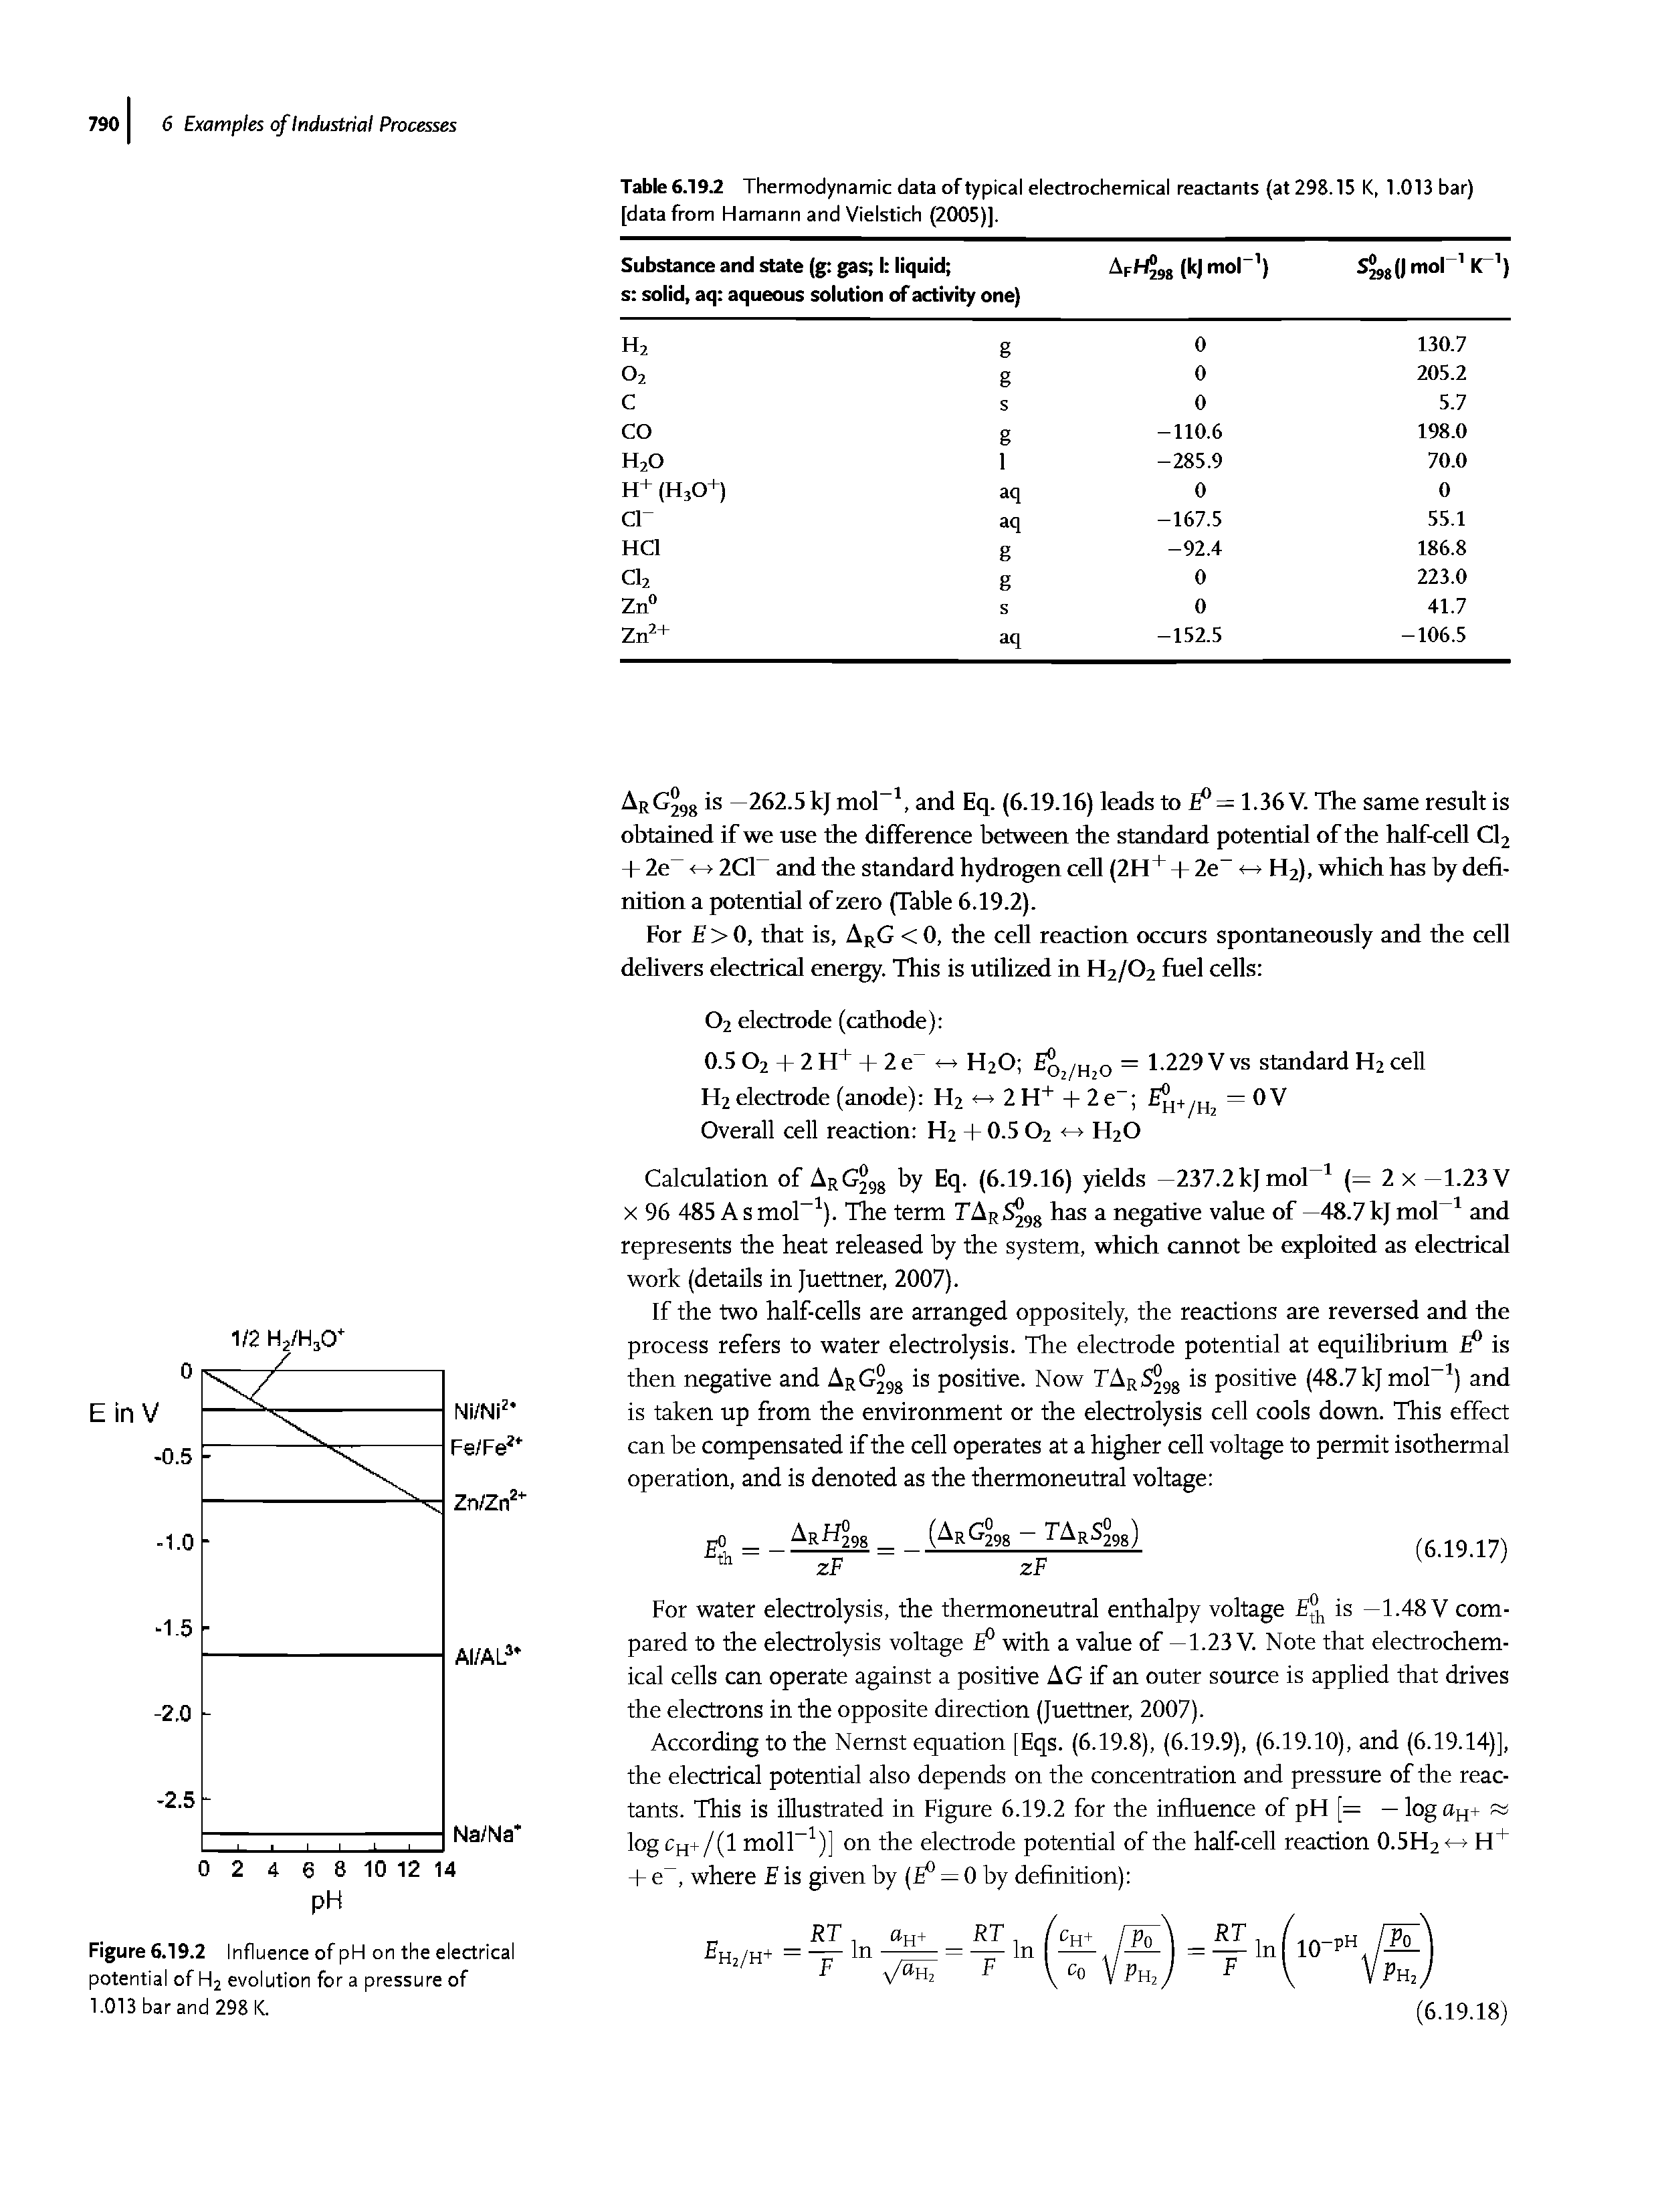 Table 6.19.2 Thermodynamic data of typical electrochemical reactants (at 298.15 K, 1.013 bar) [data from Hamann and Vielstich (2005)].